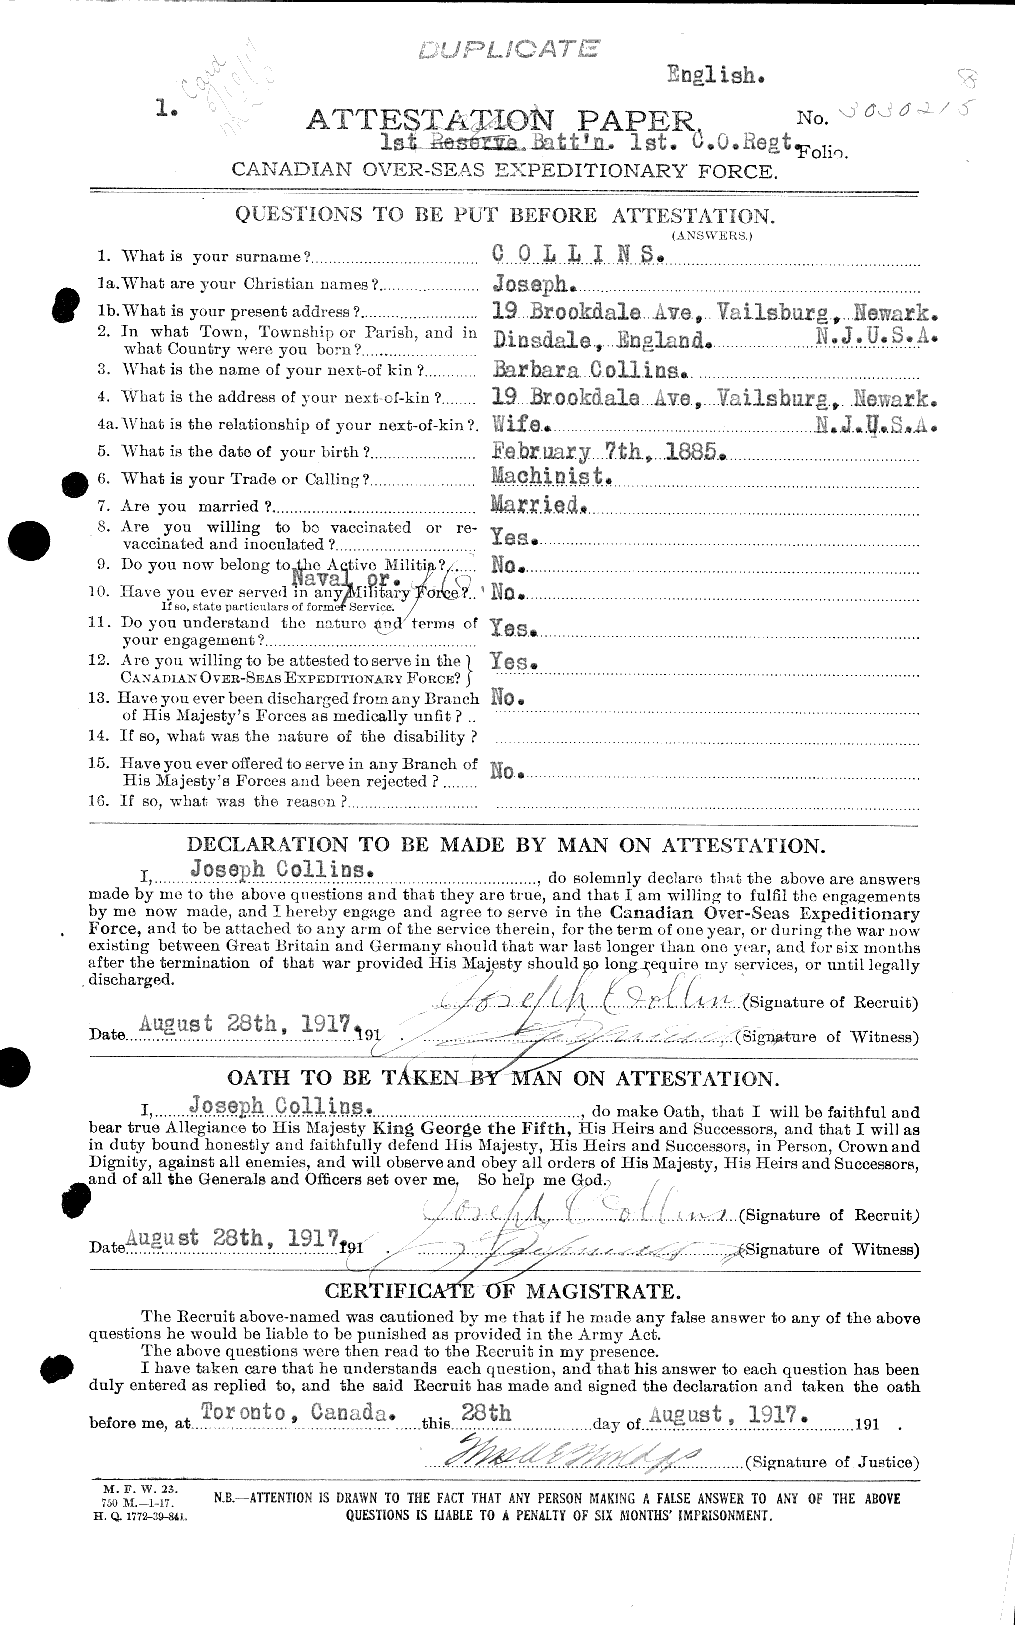 Personnel Records of the First World War - CEF 034404a